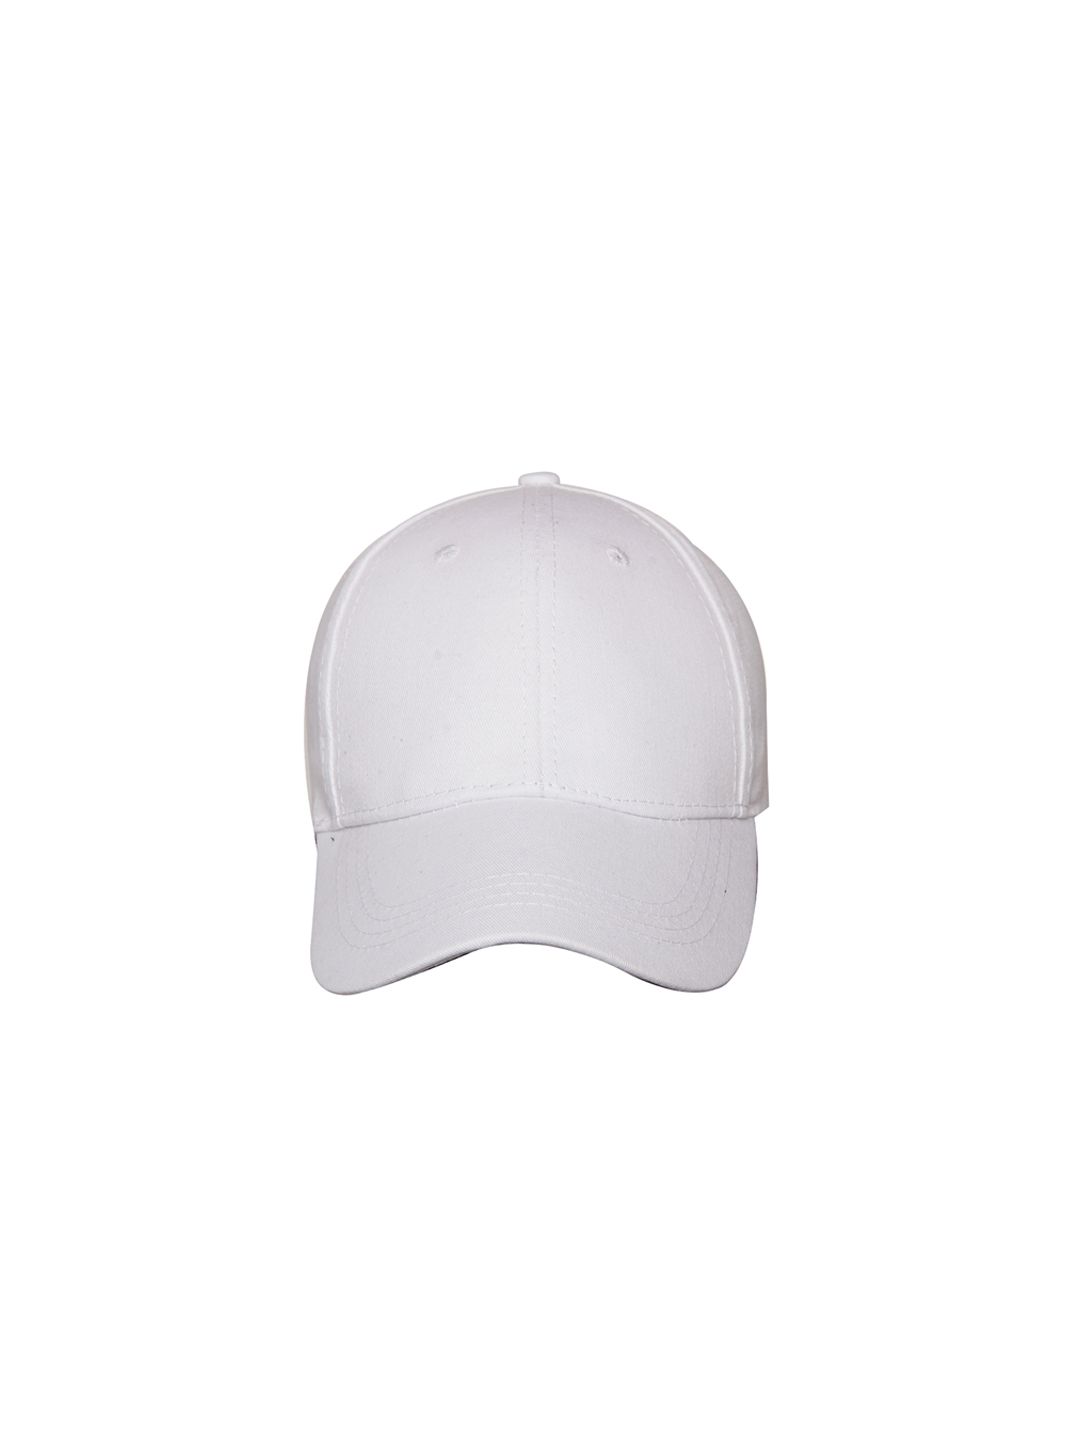 FabSeasons Unisex White Solid Baseball Cap Price in India